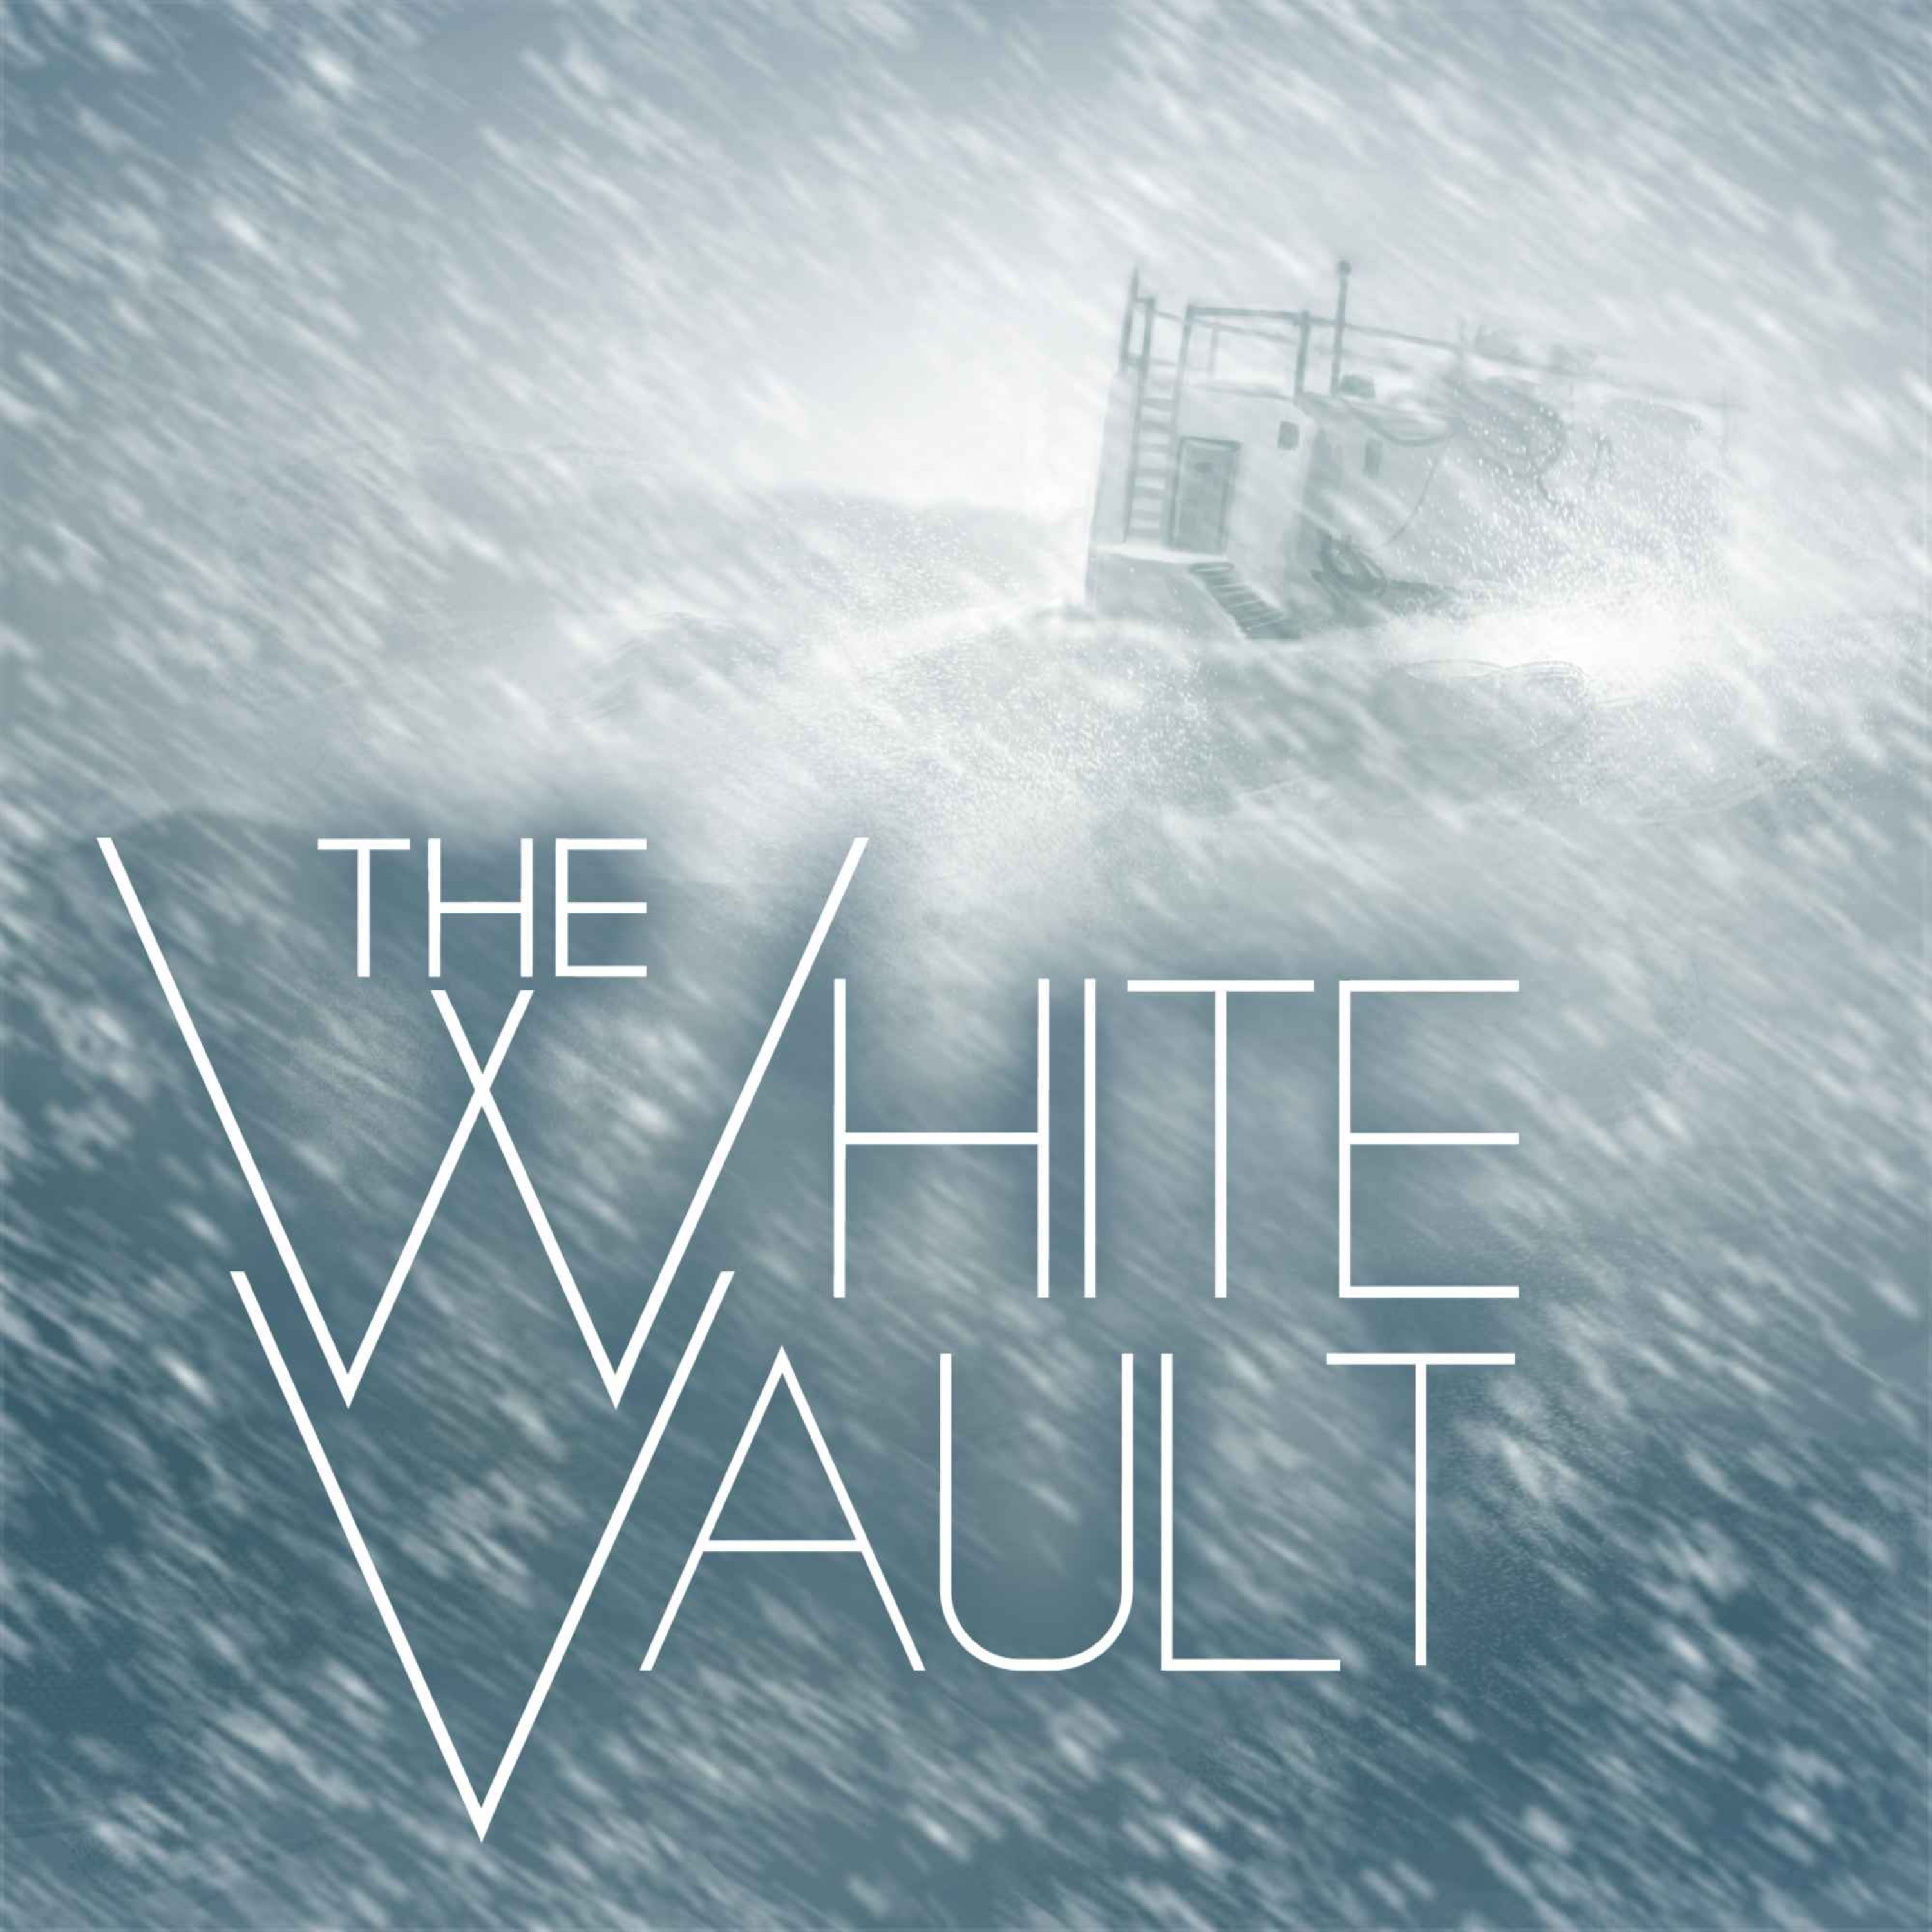 The White Vault Musical (Sneaky Sneaky Preview)